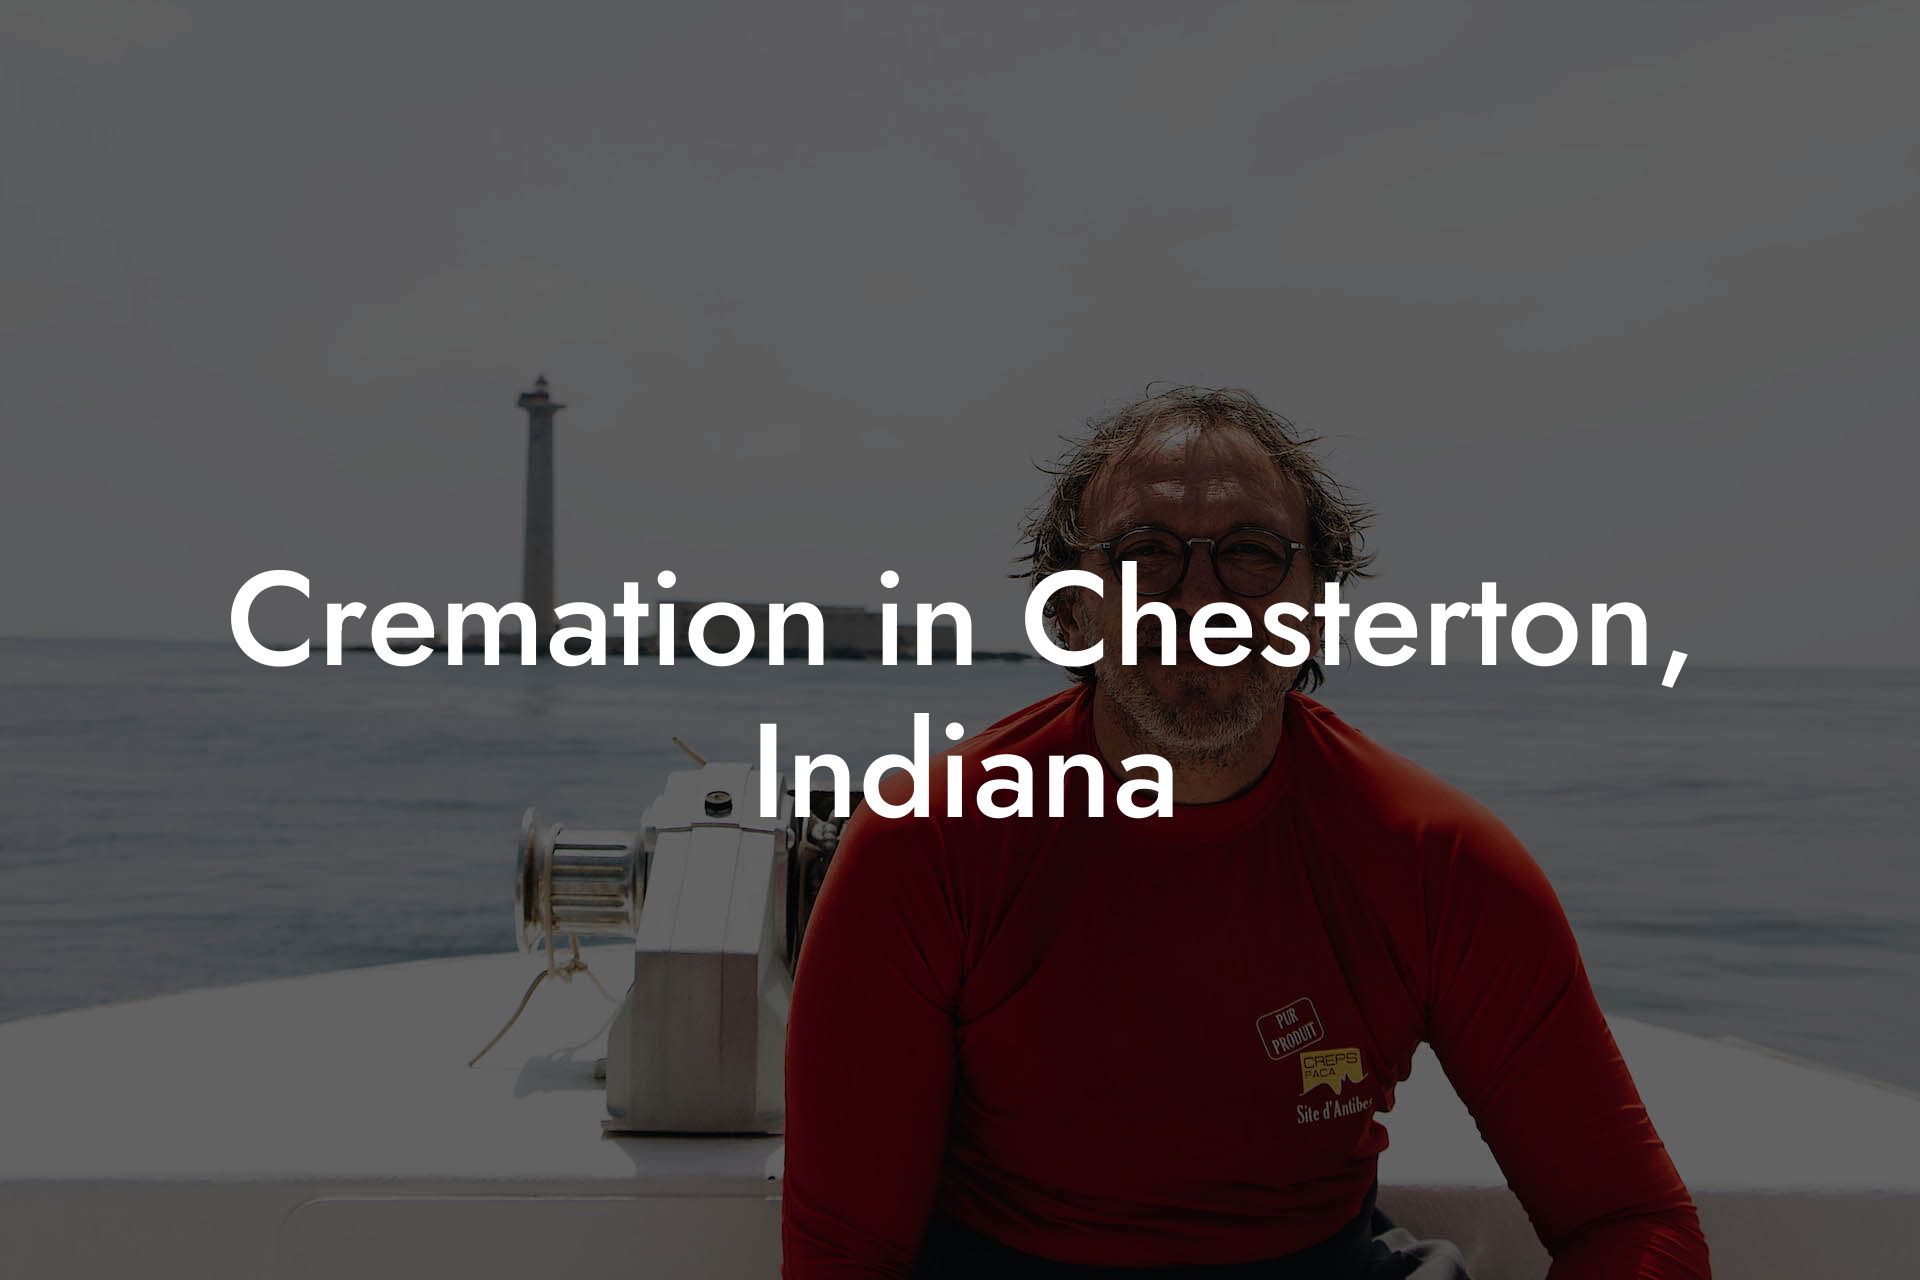 Cremation in Chesterton, Indiana